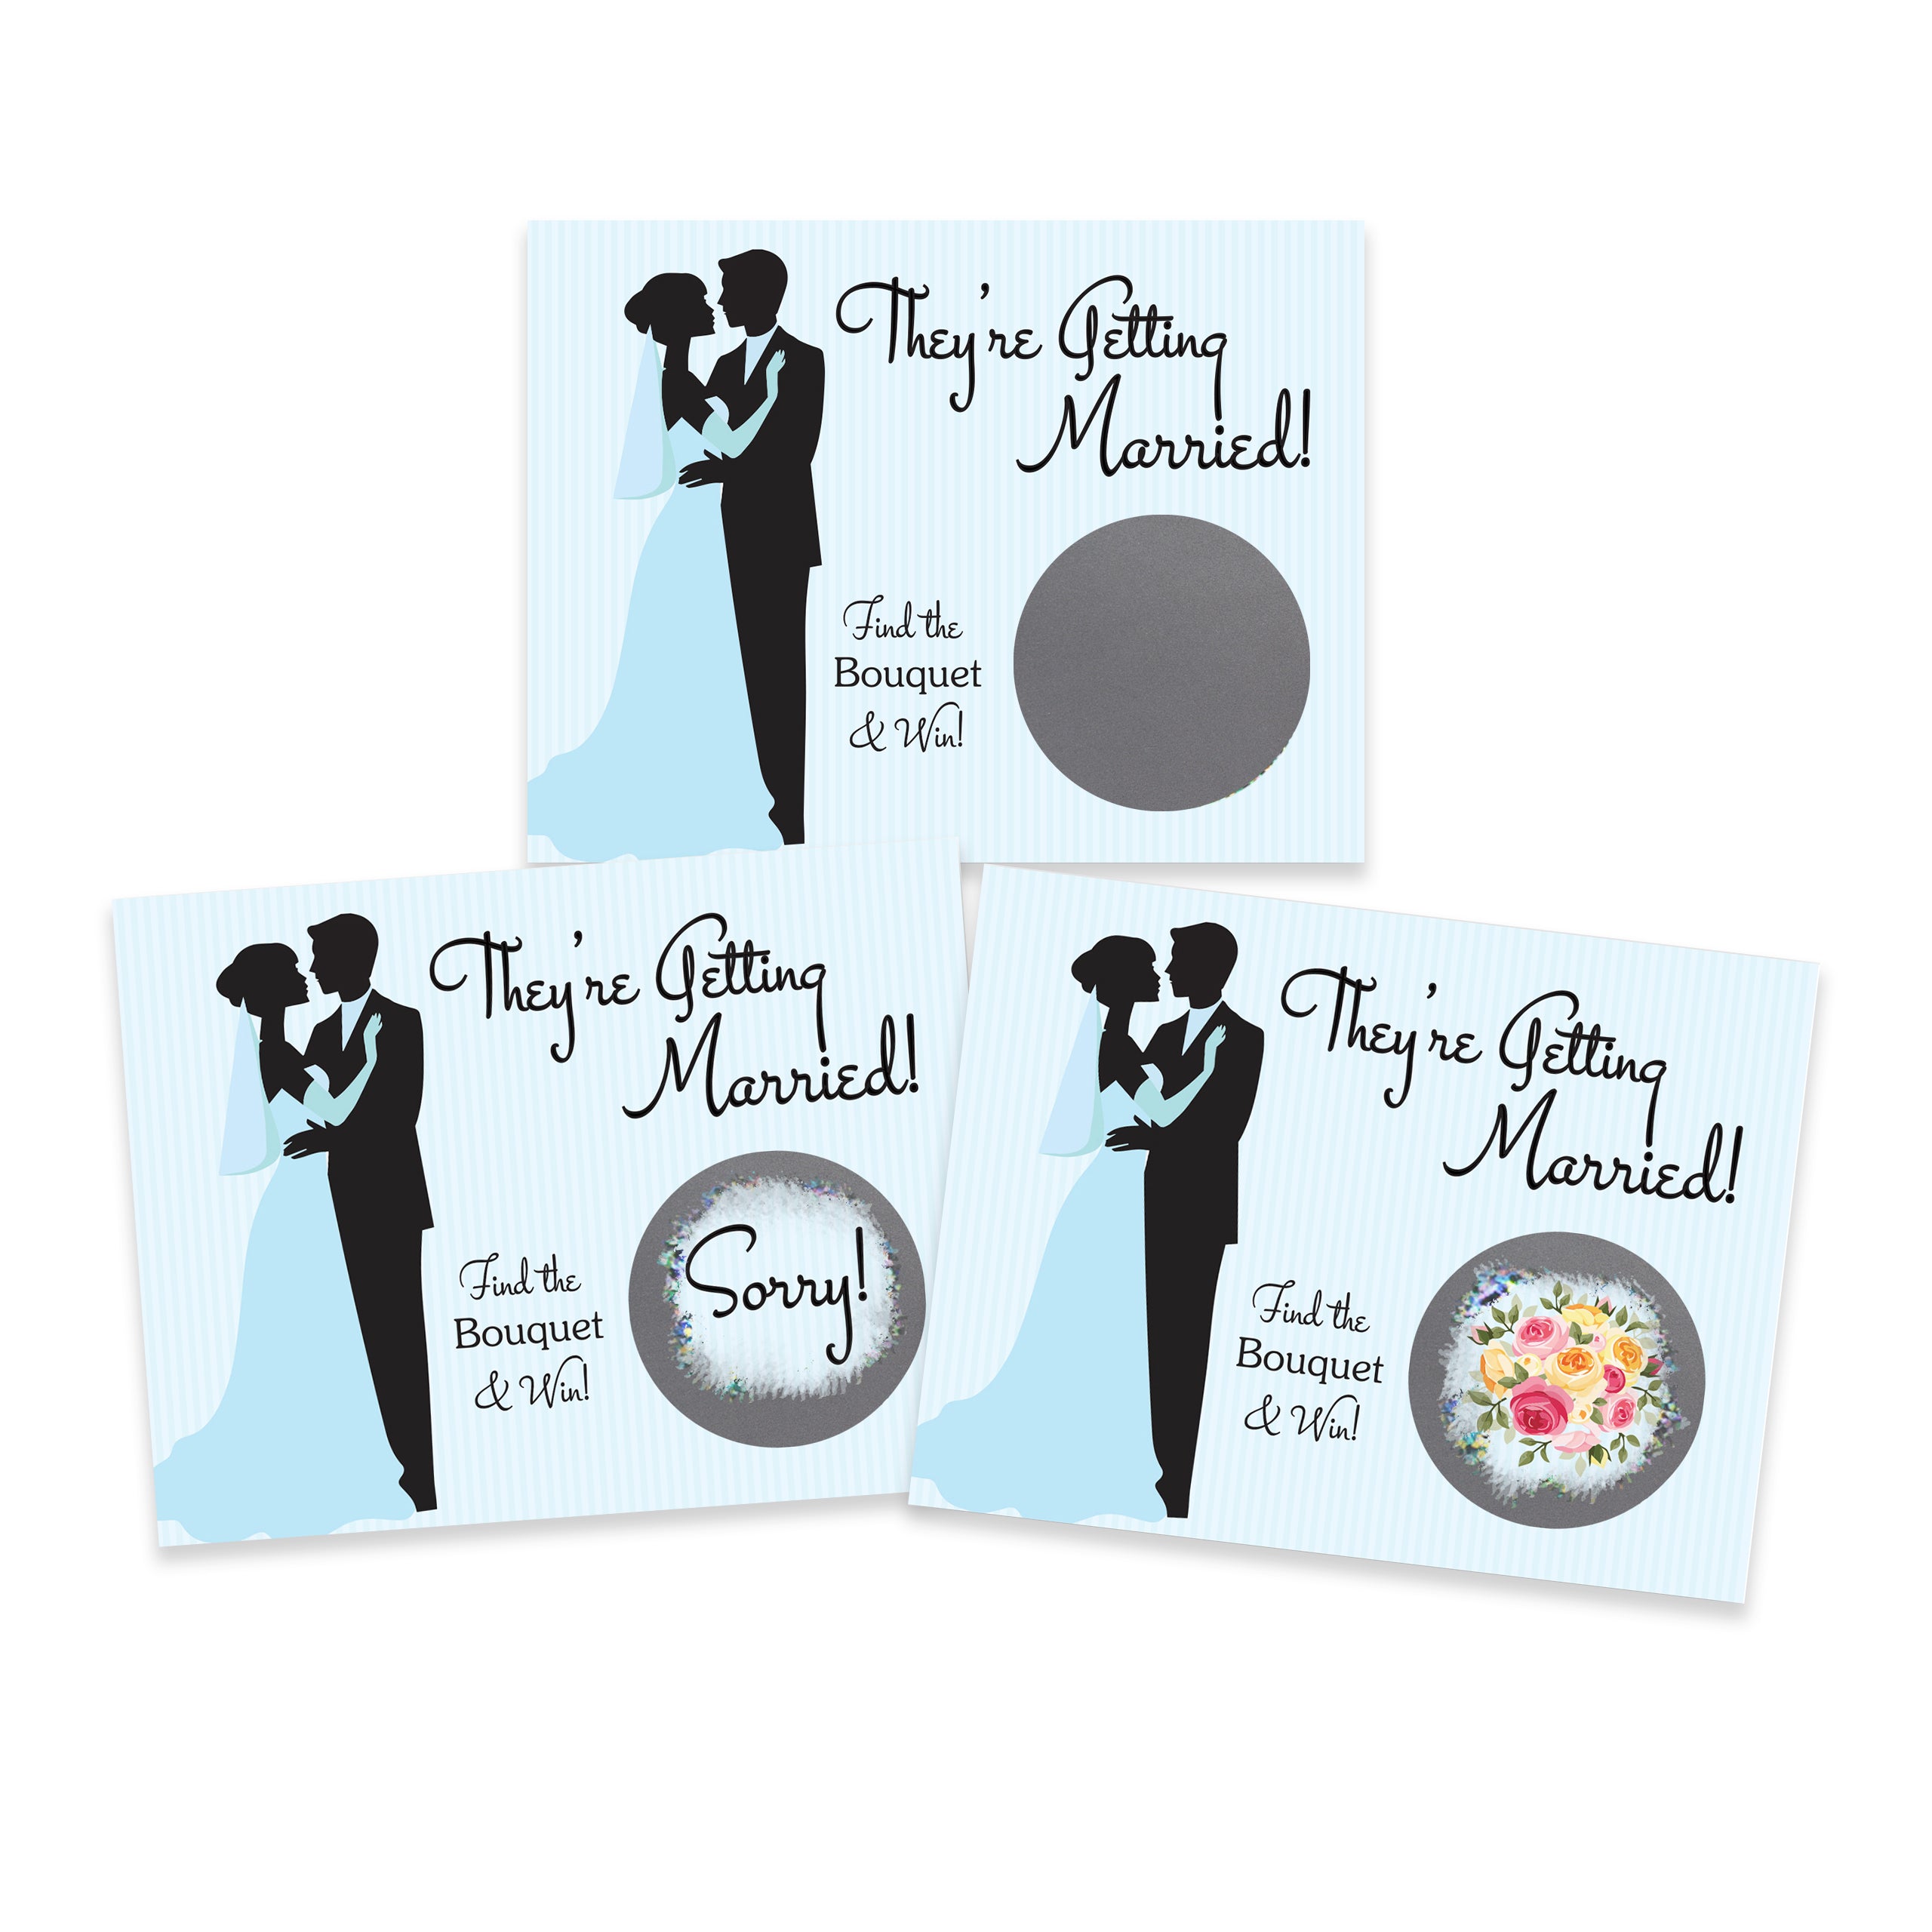 Bride & Groom Blue Pinstripe Getting Married Scratch Off Game Cards 26 Pack - 2 Winning and 24 Non-Winning Cards - My Scratch Offs